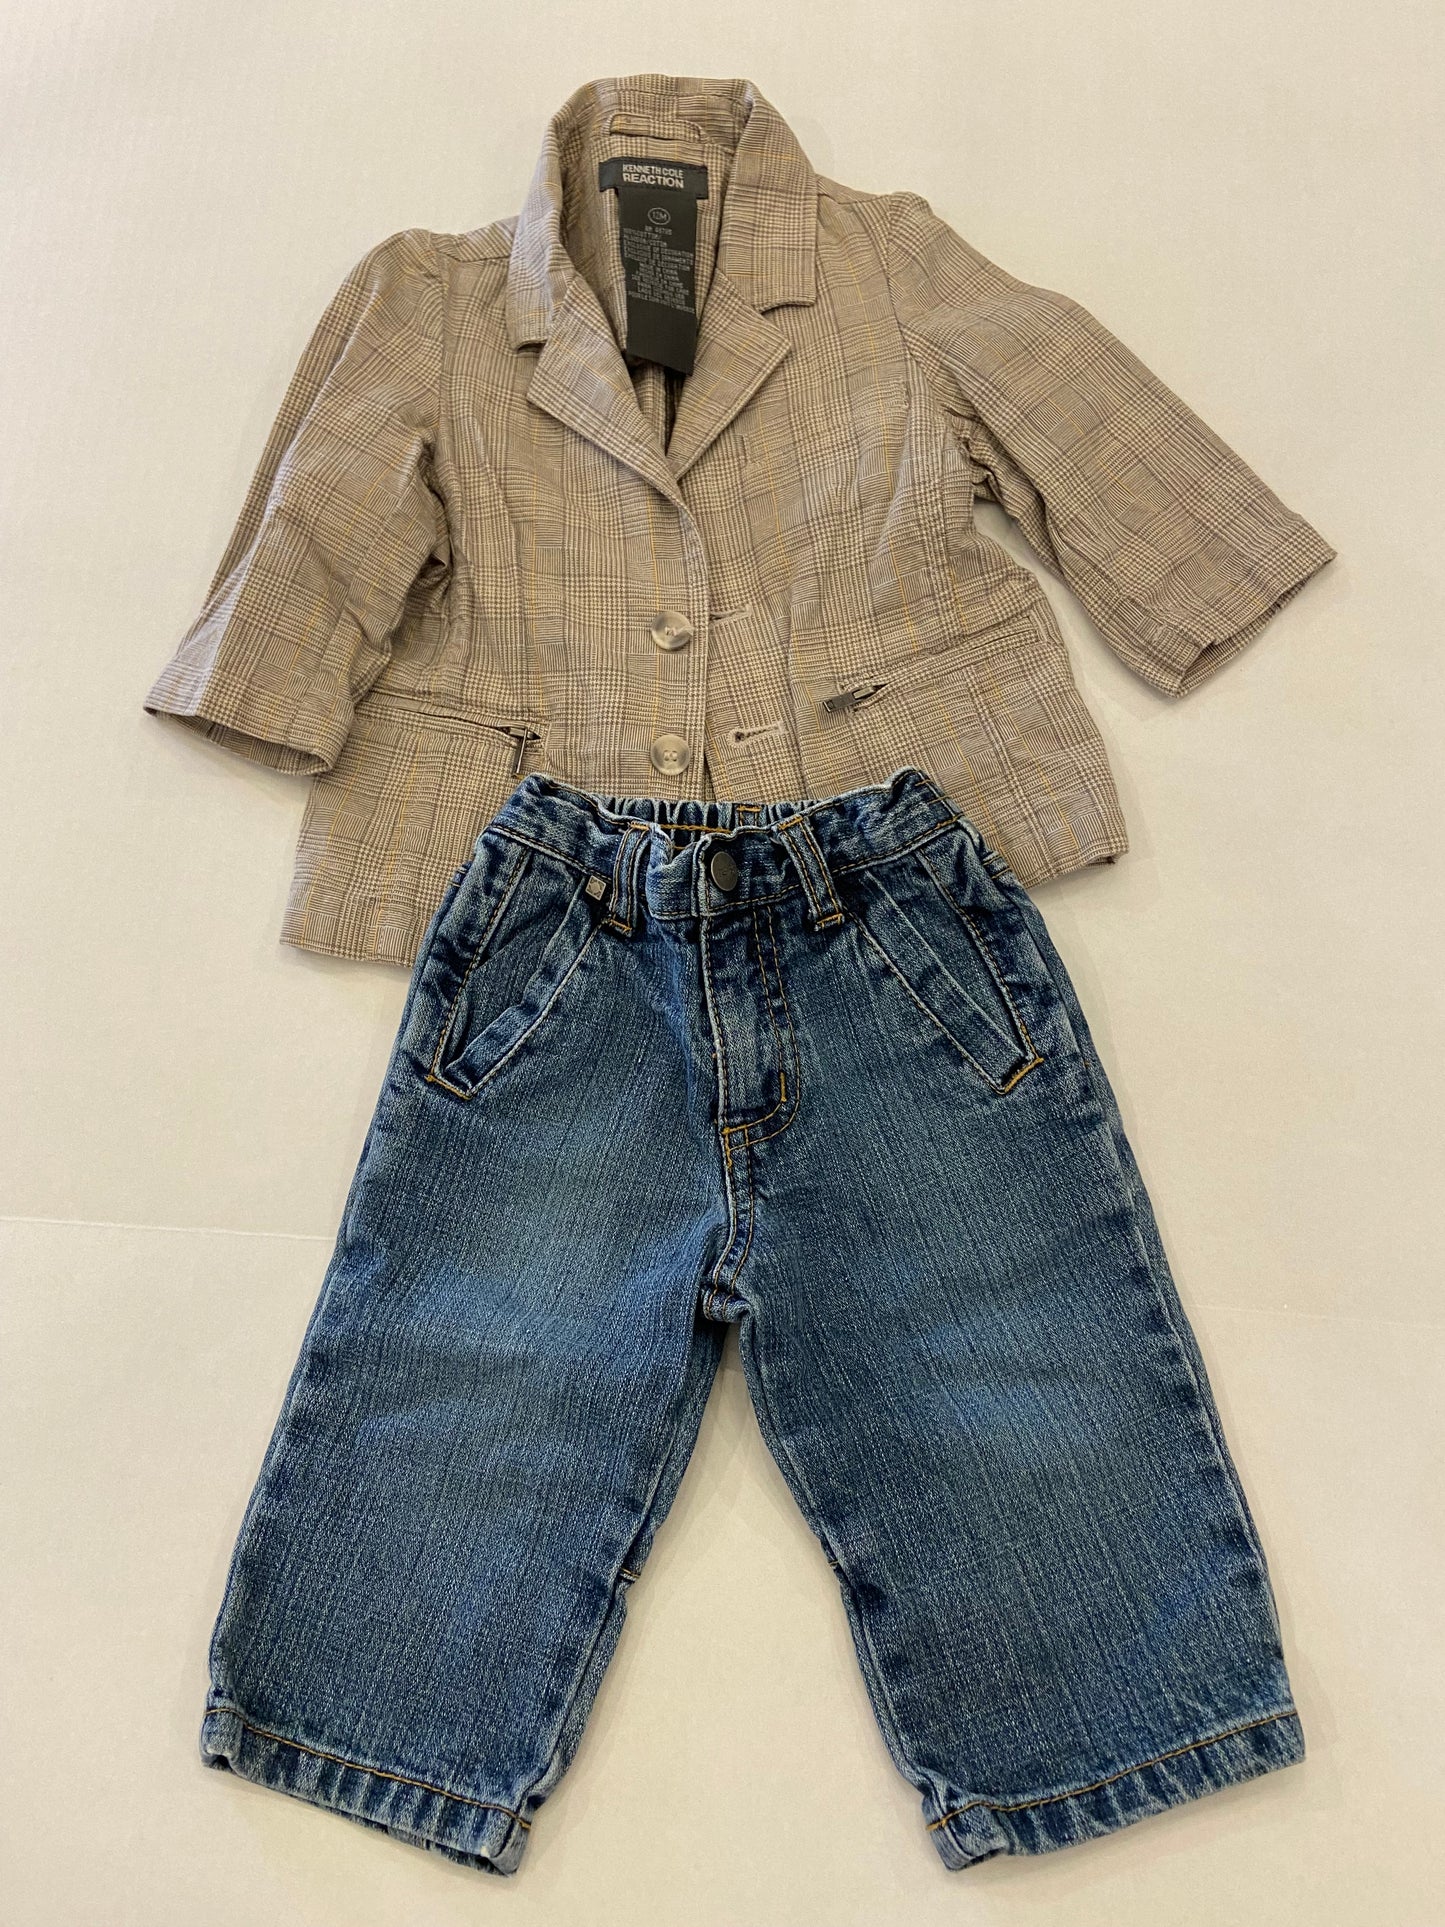 Boys 12 mos Kenneth Cole Blazer & Jeans Outfit